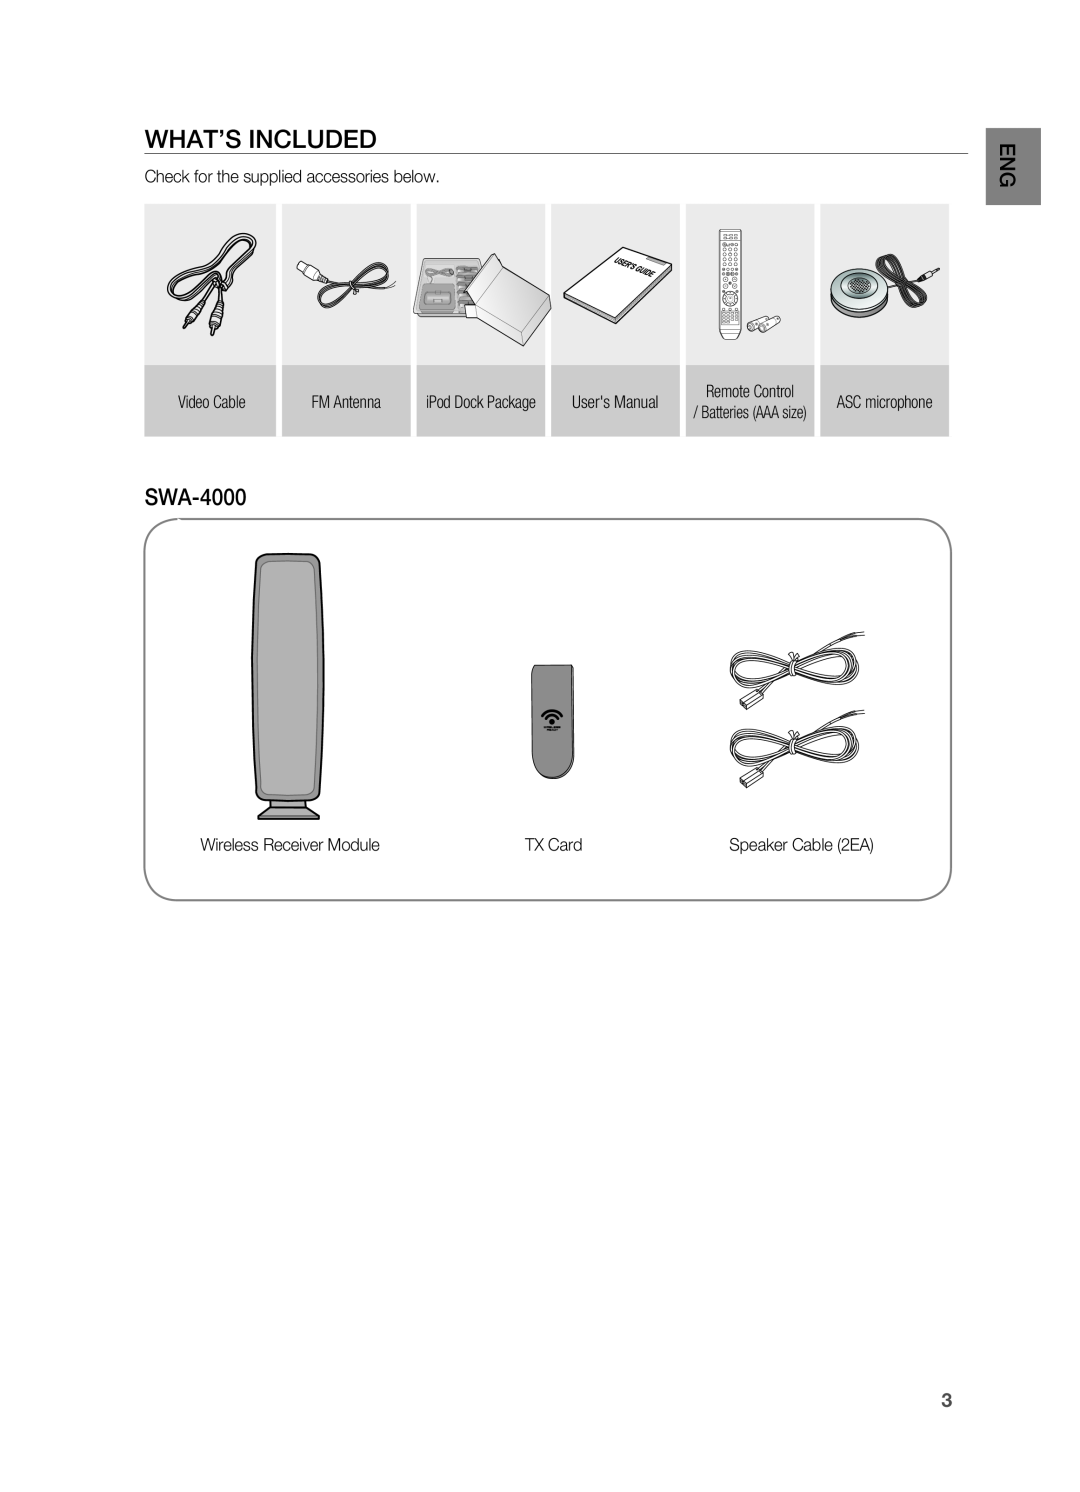 Samsung HT-TZ515 user manual What’S Included, SWA-4000, Batteries AAA size, Speaker Cable 2EA 